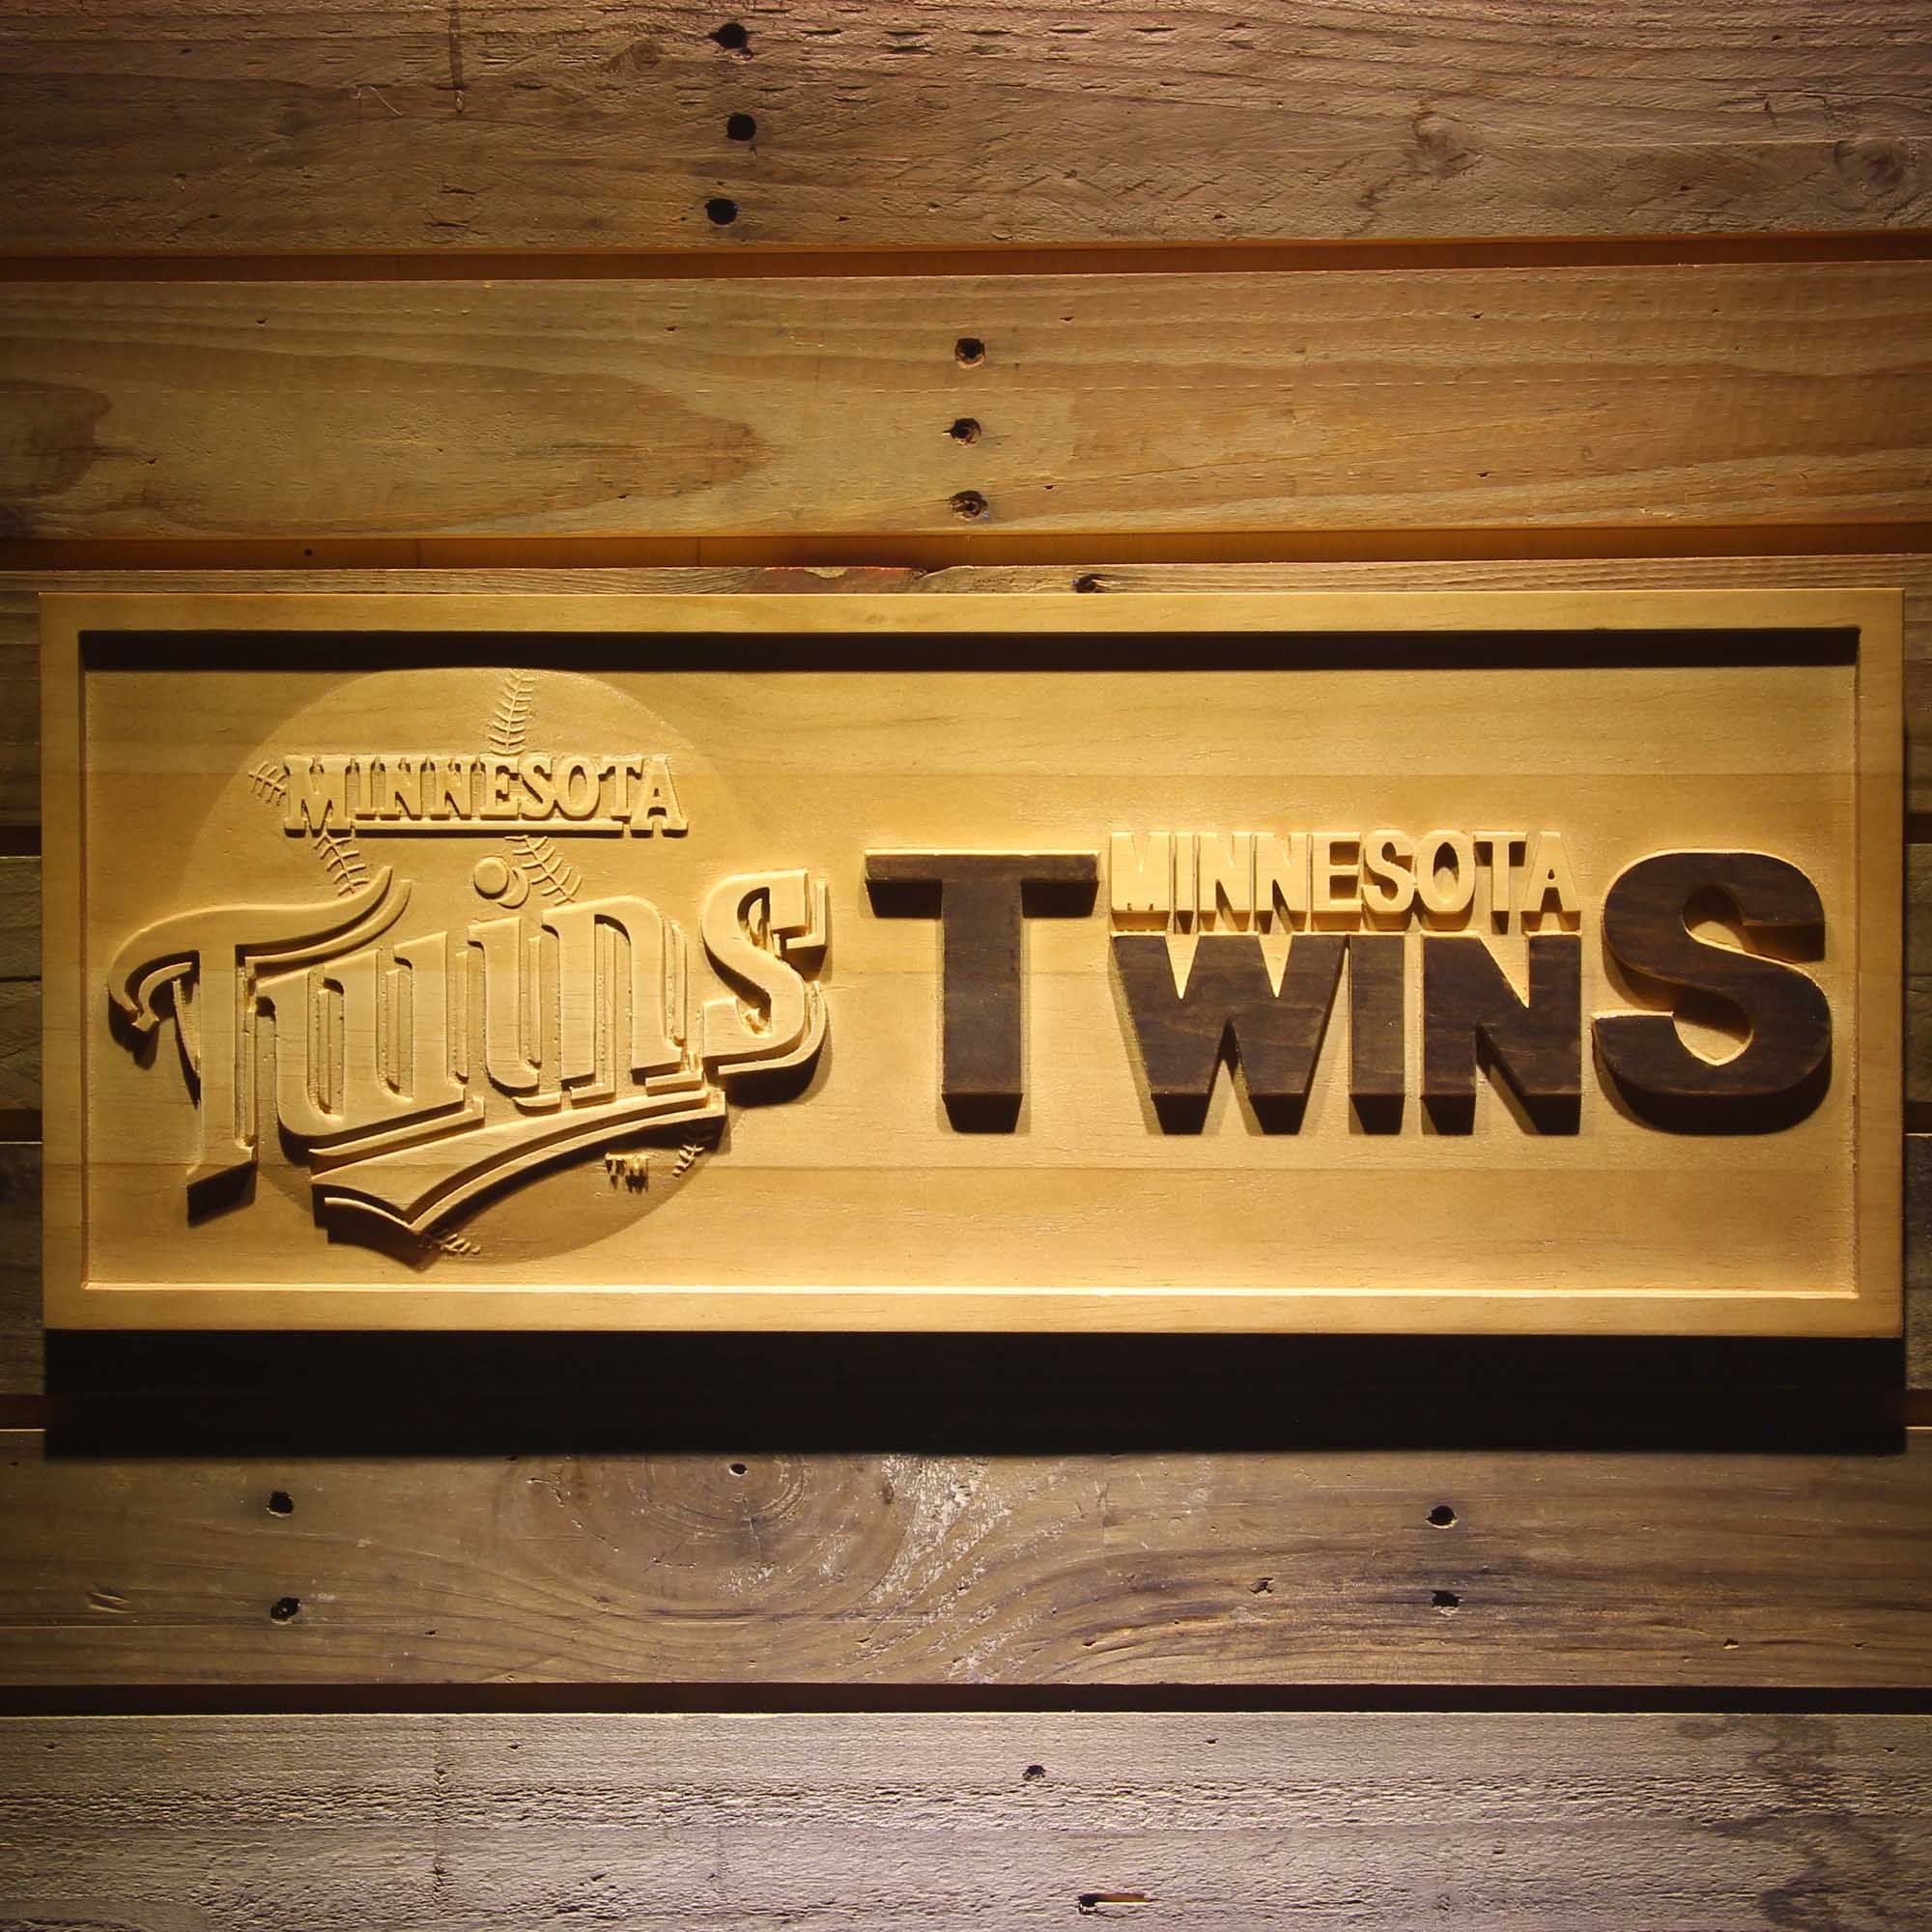 Minnesota Twins 3D Solid Wooden Craving Sign